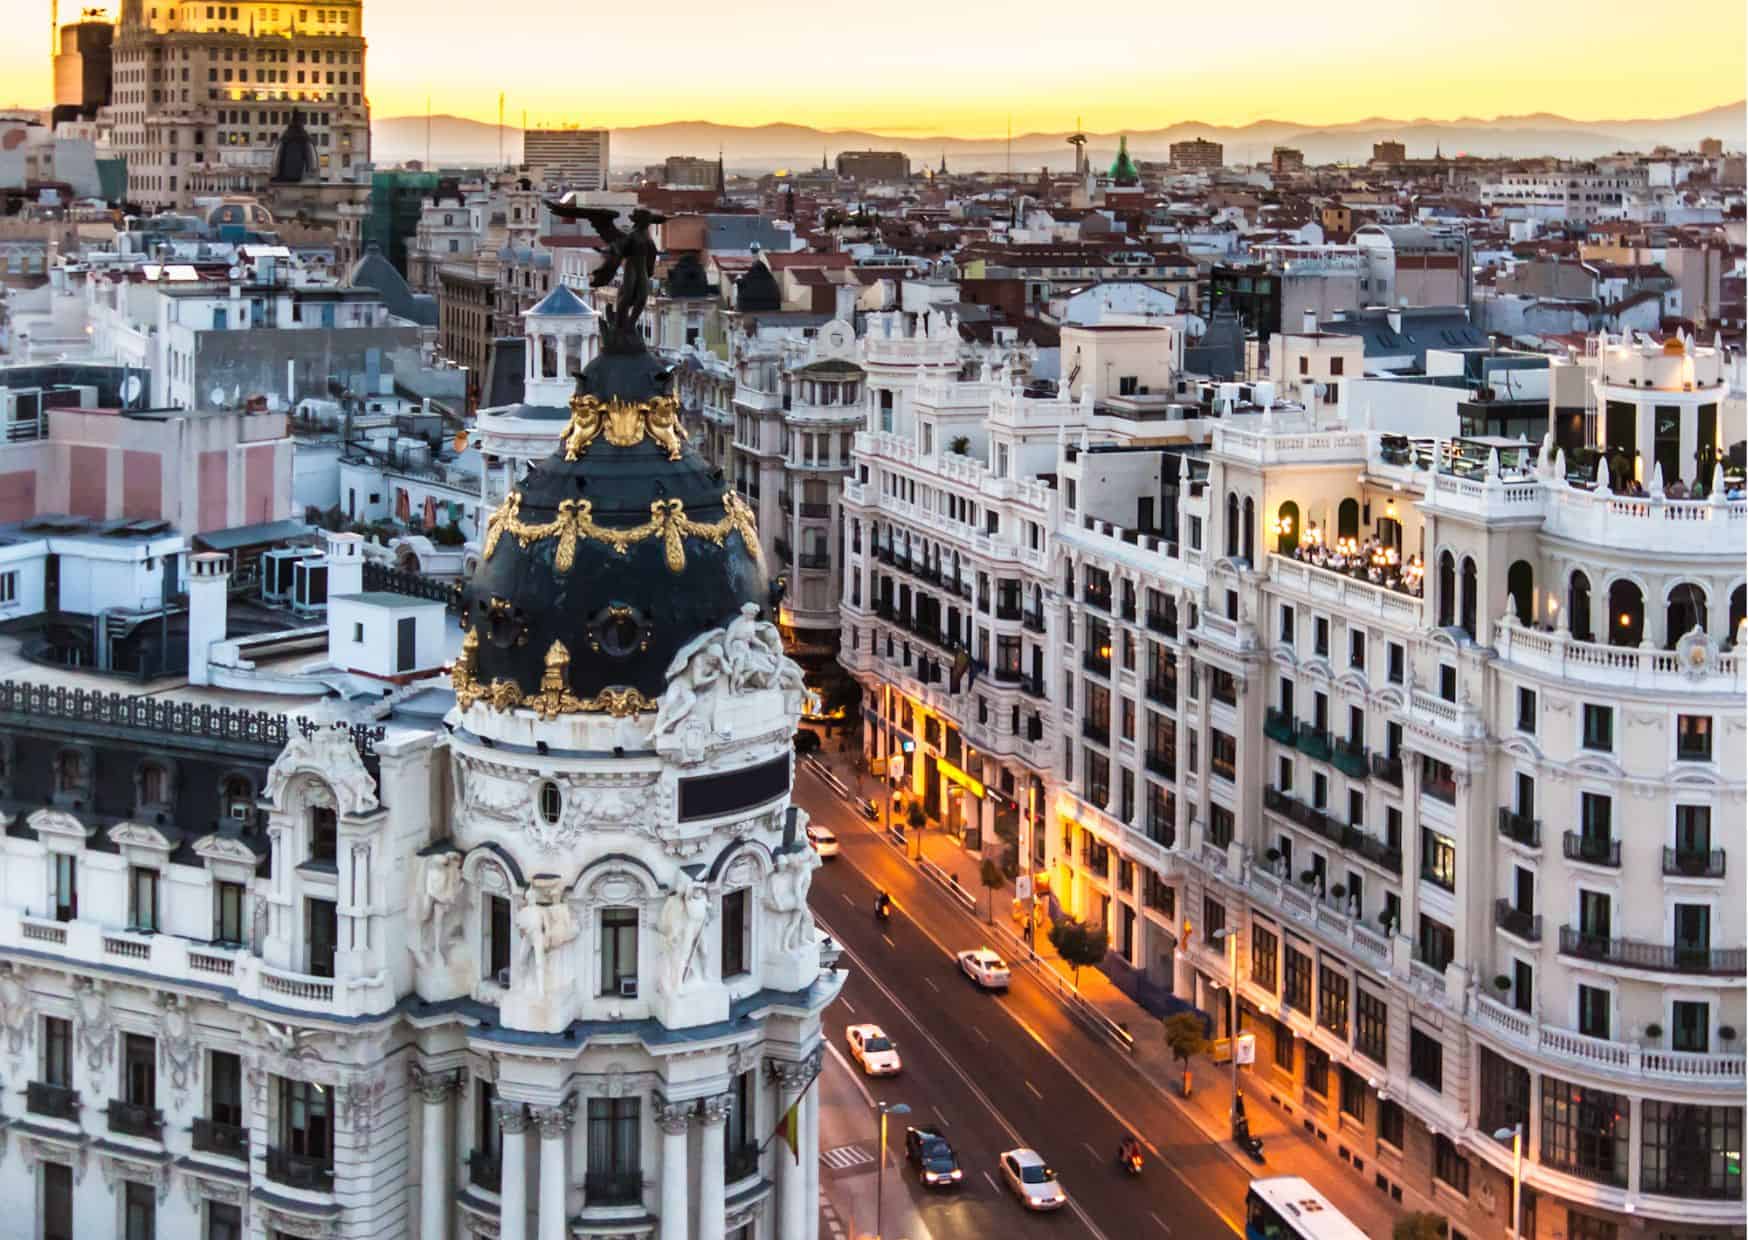 How To Get From Madrid to Madrid Airport Best Way, shuttle bus from Madrid to Madrid Airport, bus from Madrid to Madrid Airport, cheapest way from Madrid to Madrid Airport, Madrid to Madrid Airport, by metro Madrid to Madrid Airport, by train Madrid to Madrid Airport, taxi from Madrid to Madrid Airport, uber from Madrid to Madrid Airport, private transfer from Madrid to Madrid Airport